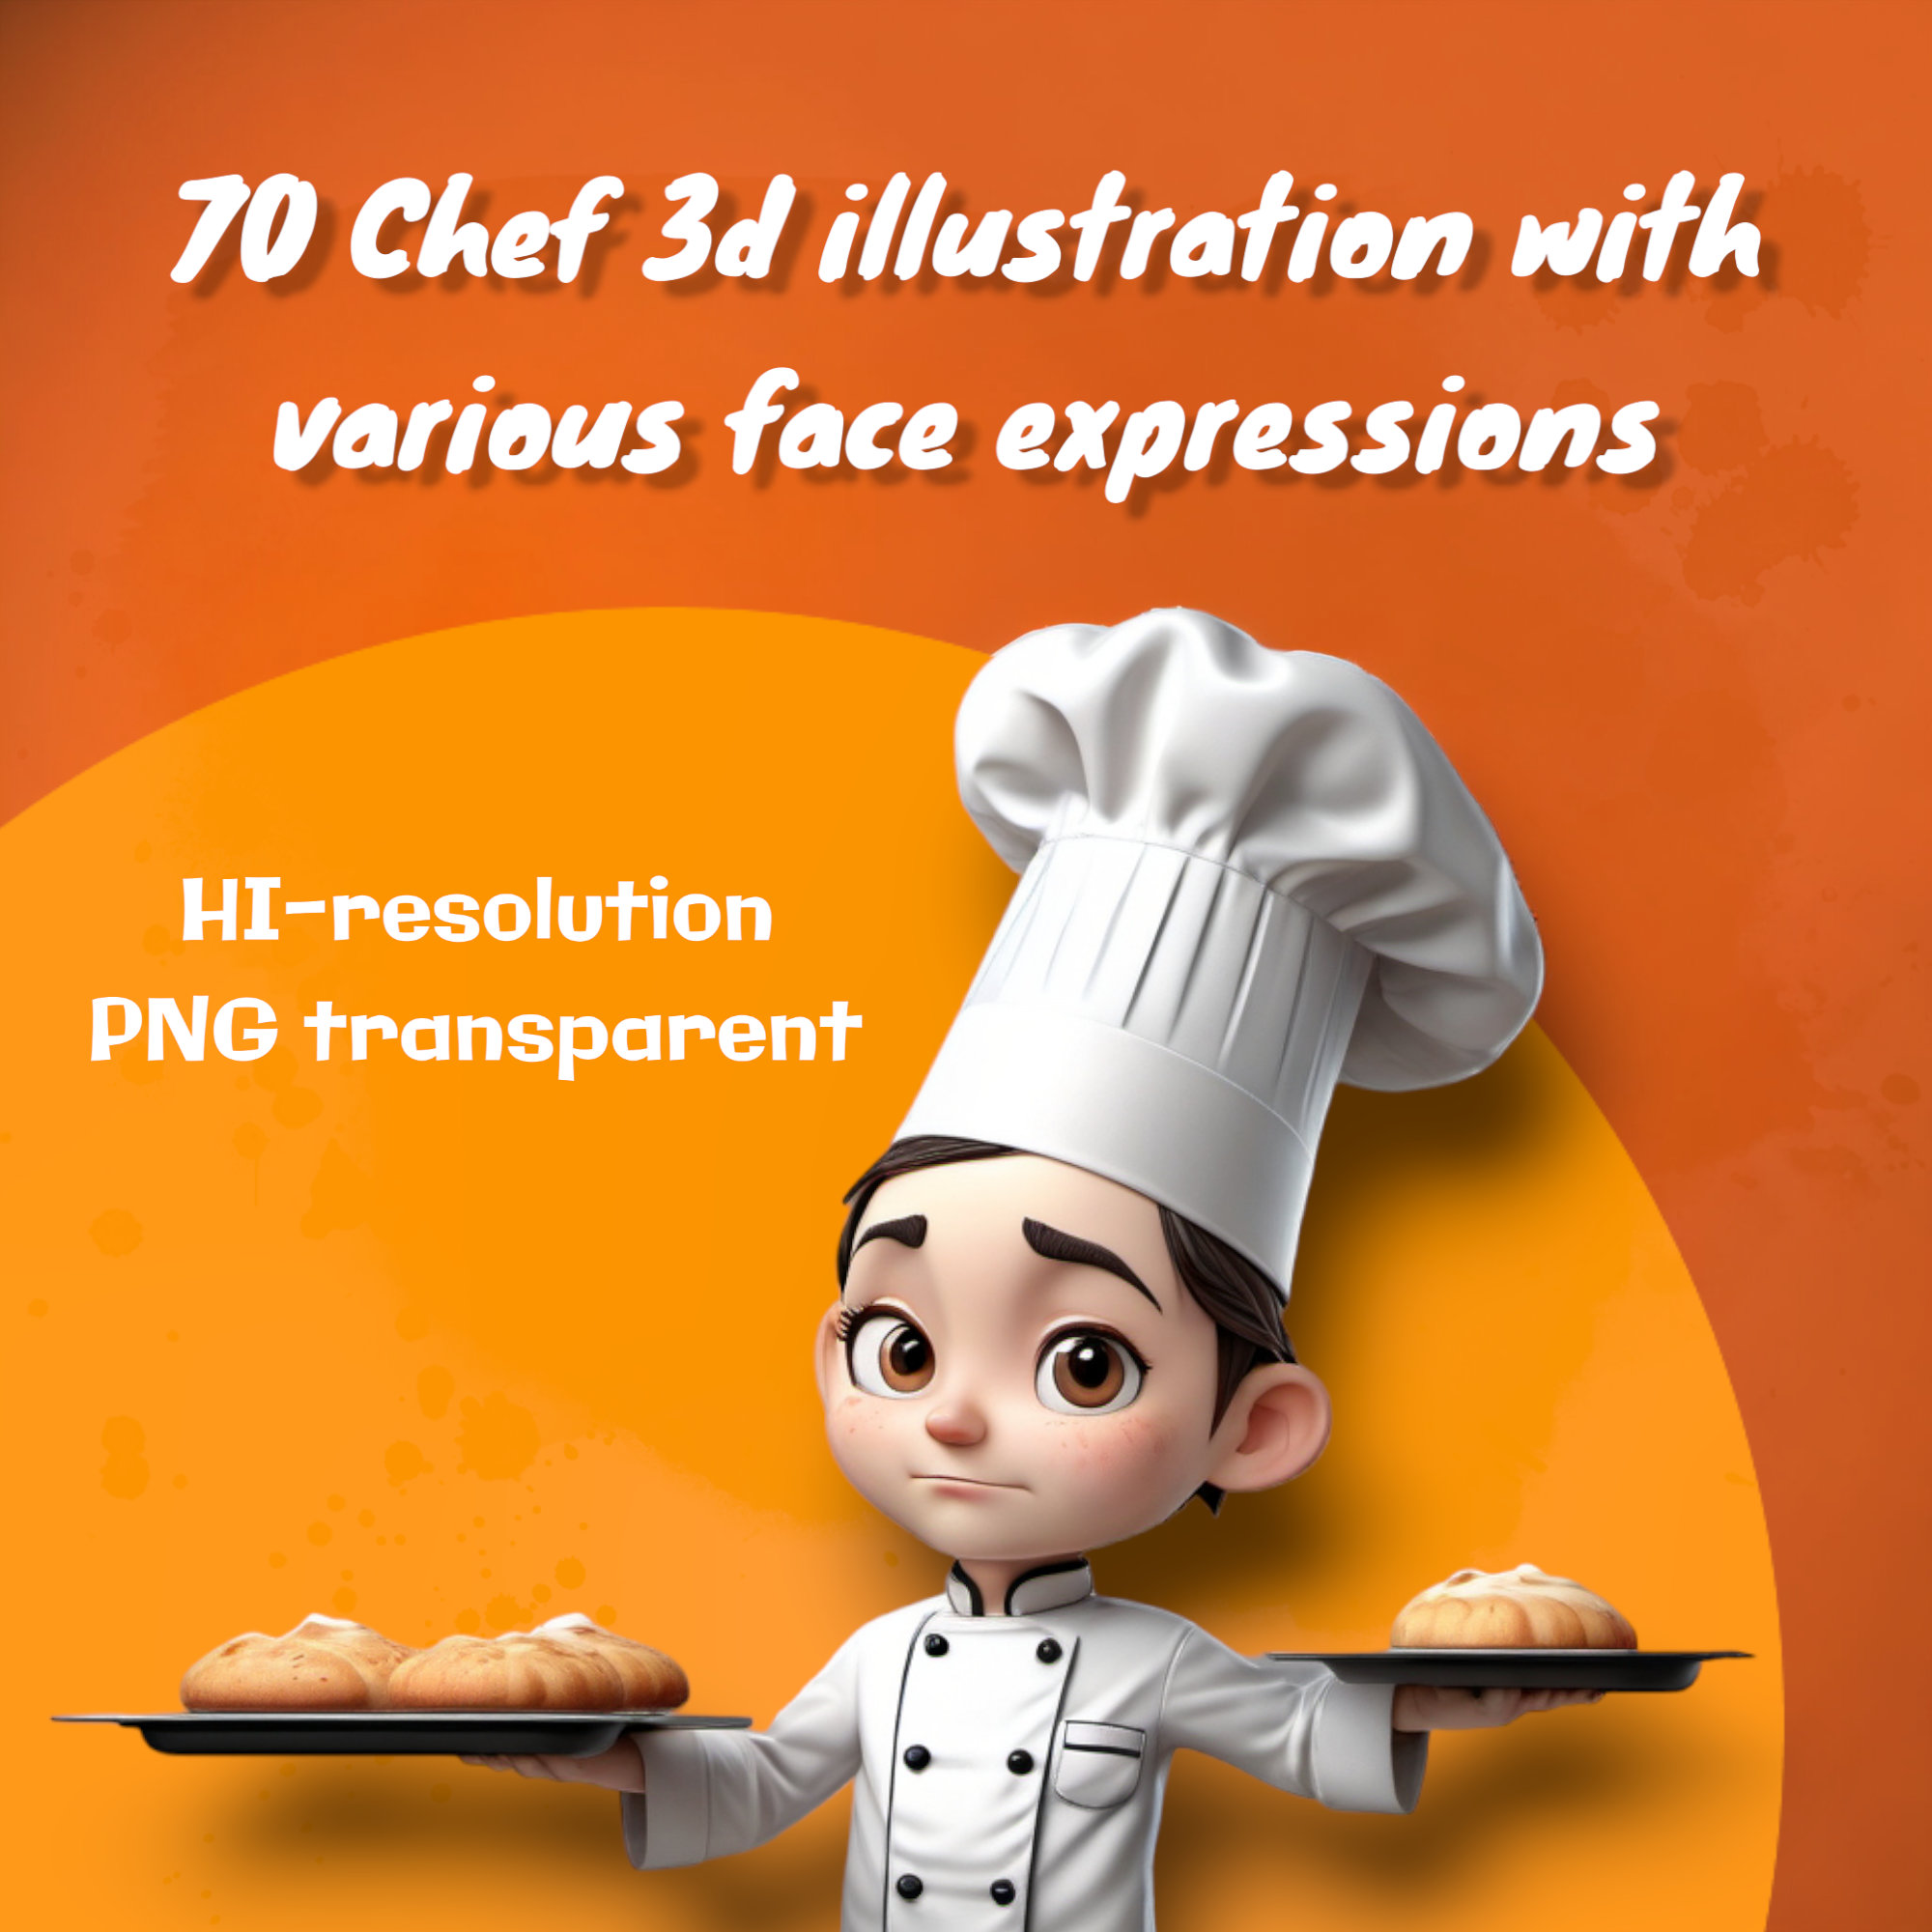 70 Chef 3d illustration with various face expressions cover image.